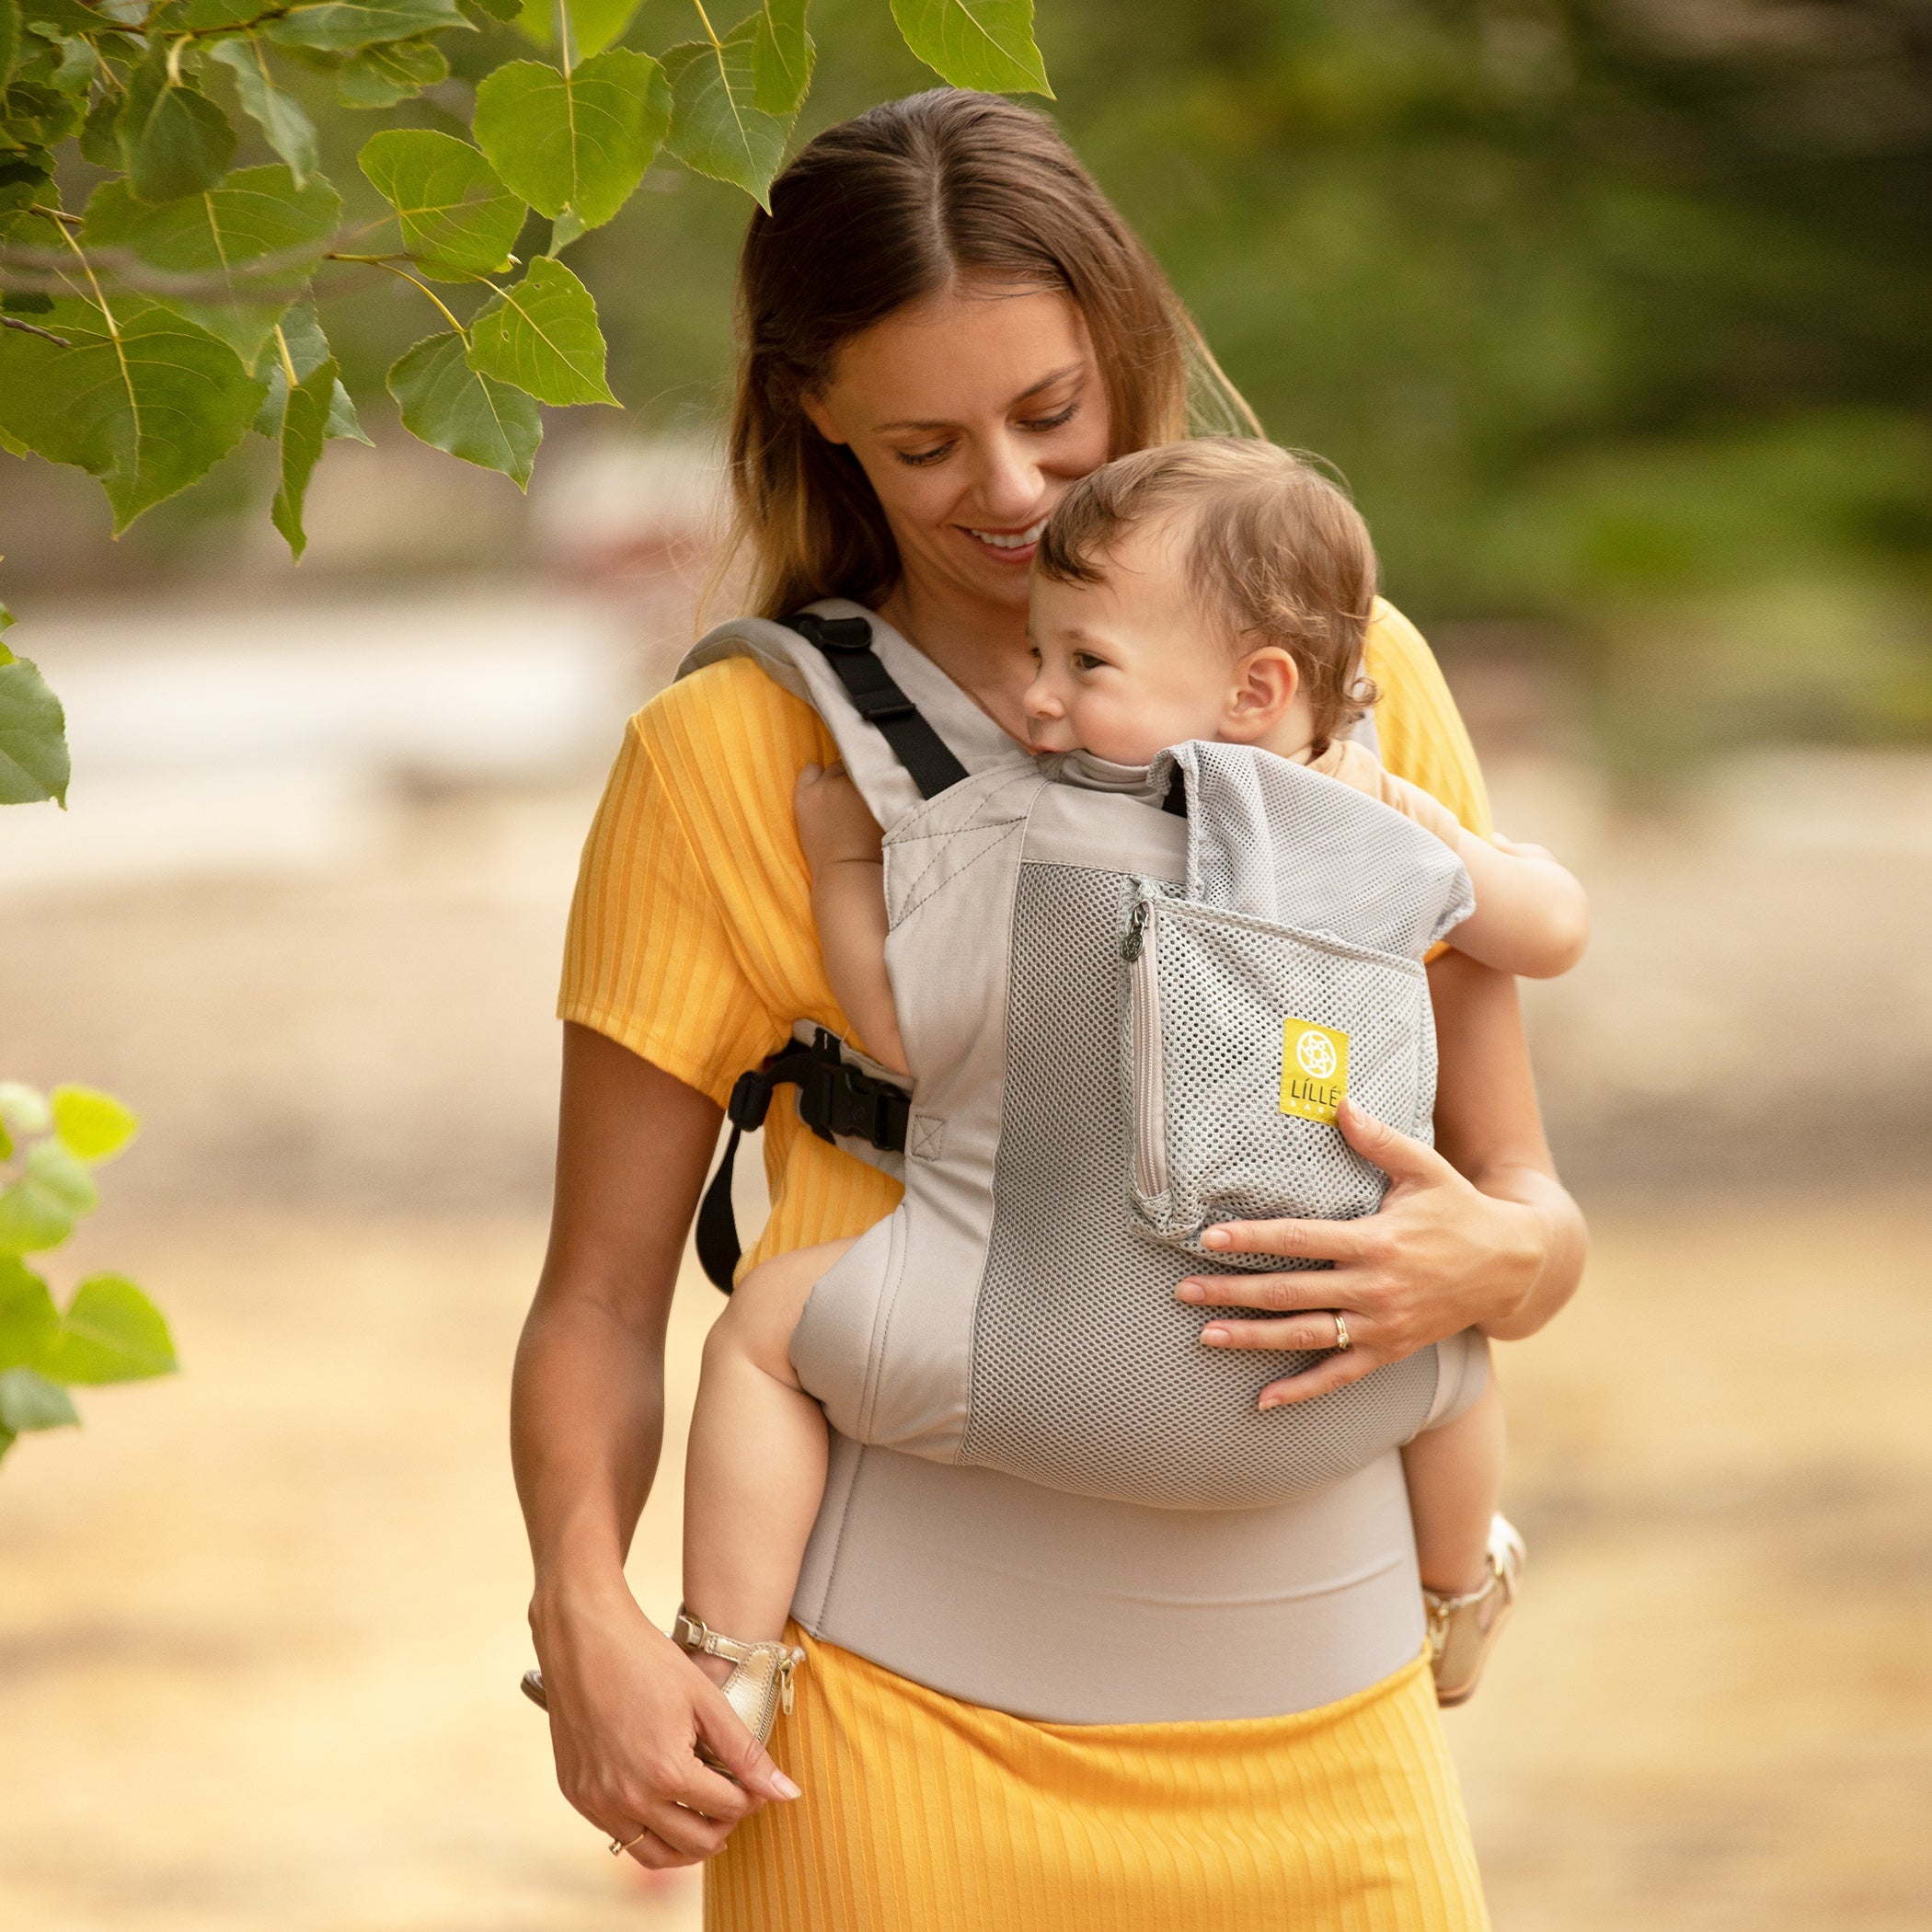 Toddler Carrier CarryOn Airflow in Mist